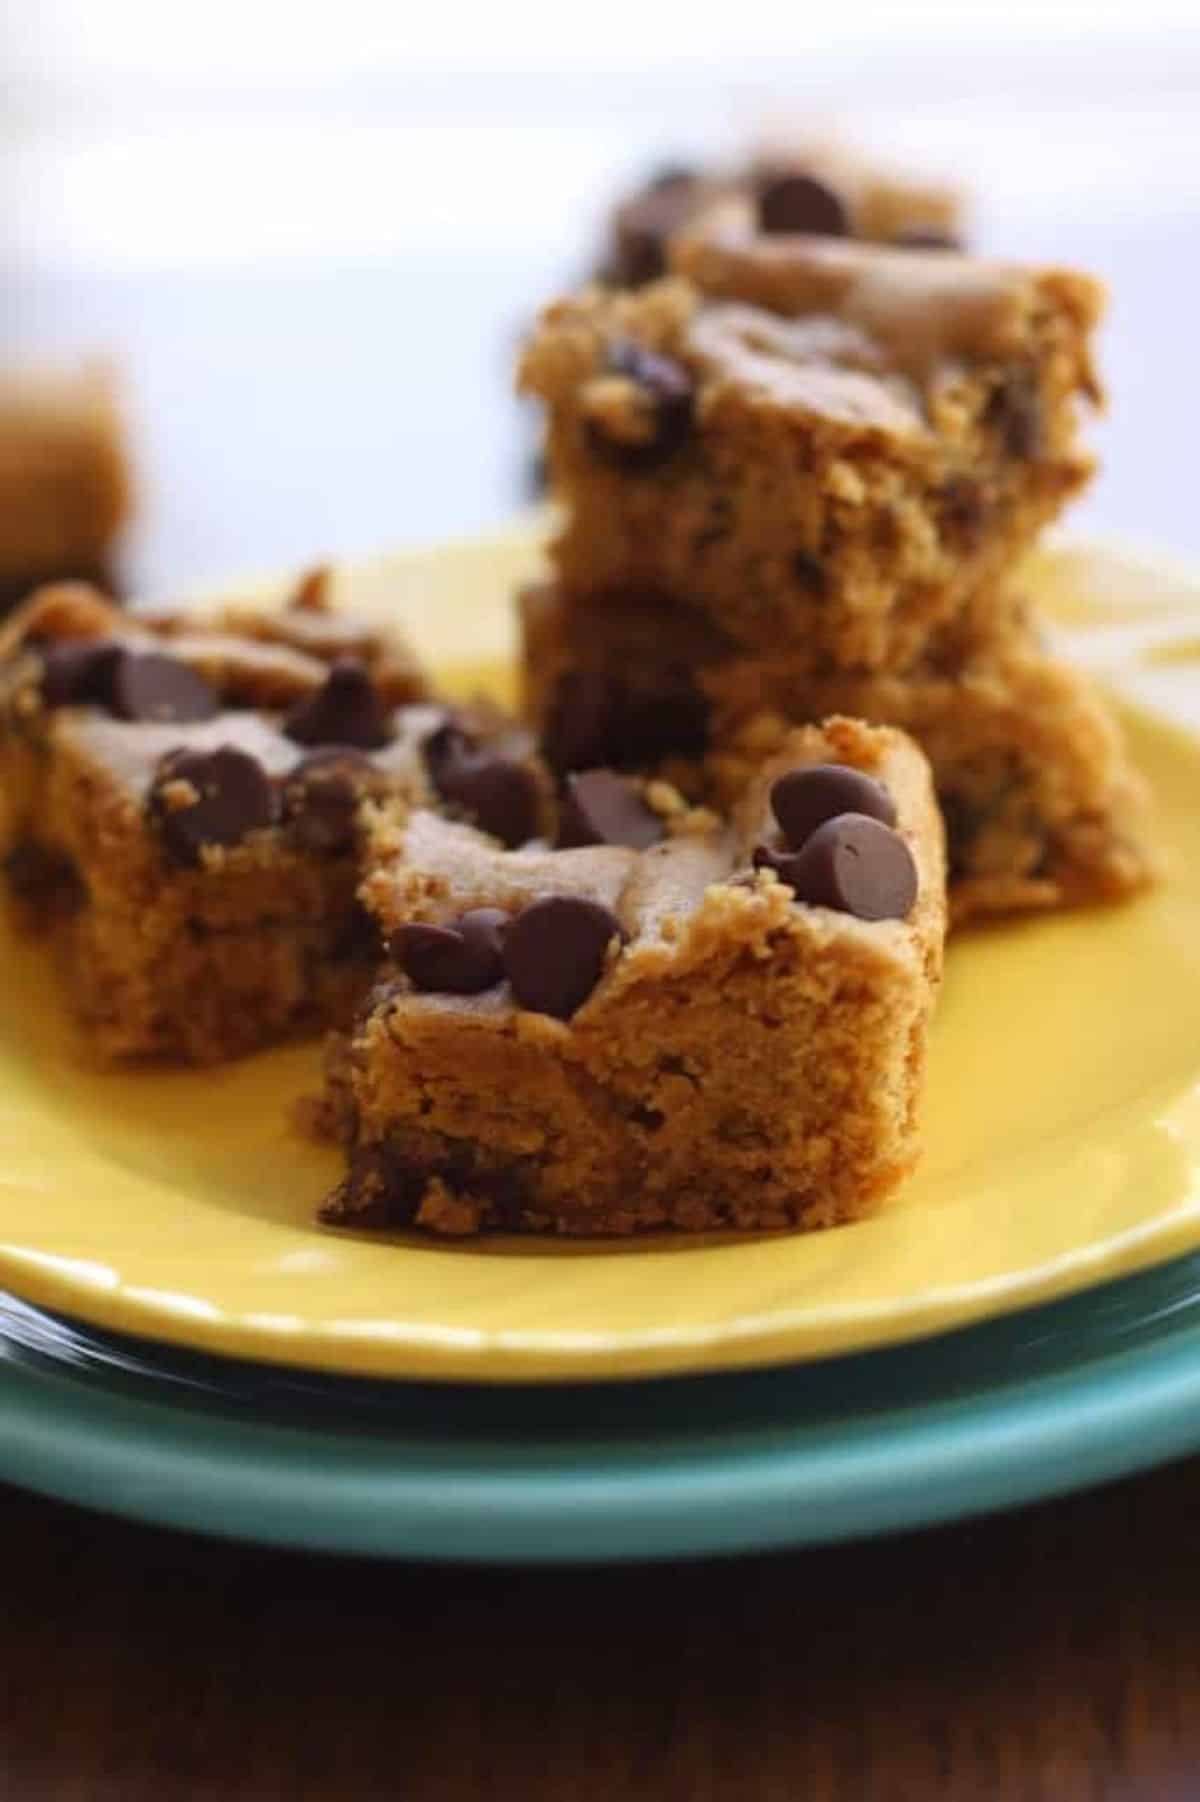 Scrumptious Gluten-Free Blondies with Chocolate Chips on a yellow plate.